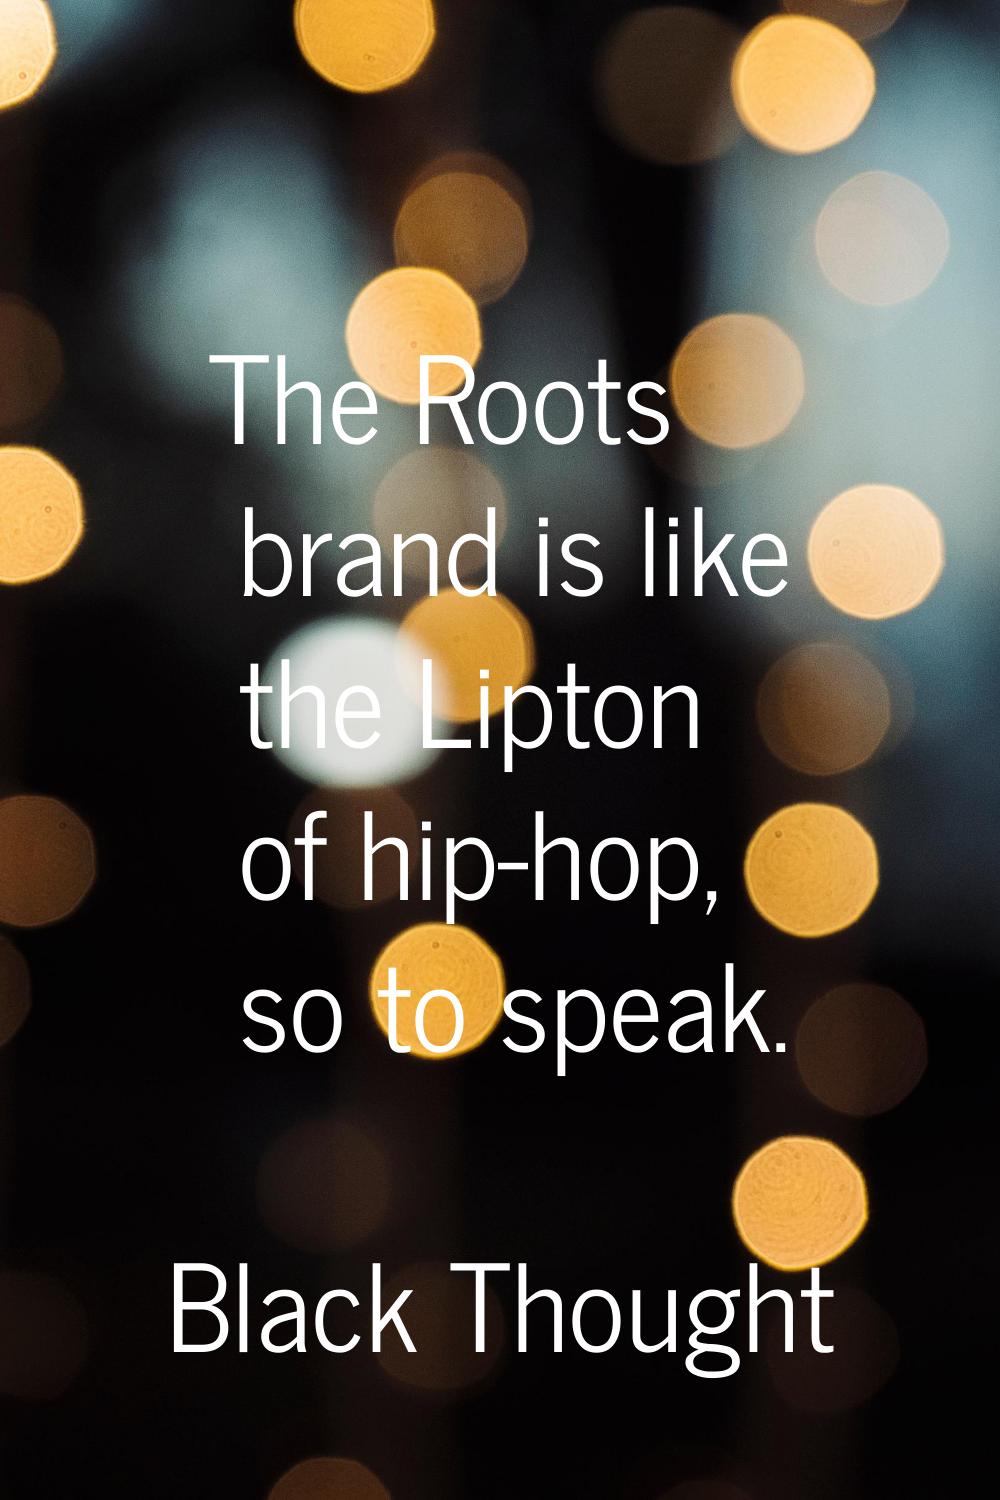 The Roots brand is like the Lipton of hip-hop, so to speak.